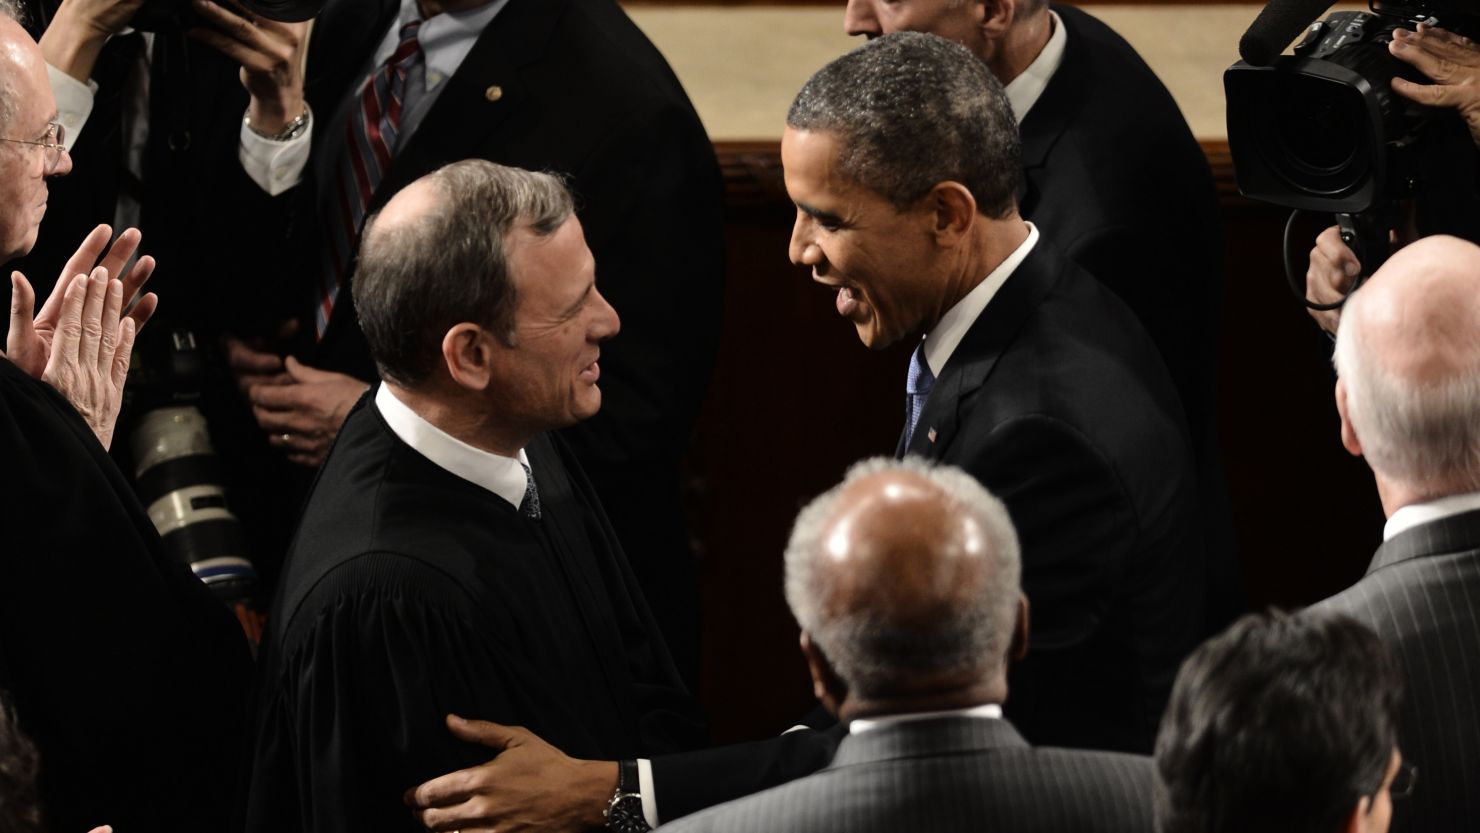 President Obama greets U.S. Chief Justice John Roberts before the State of the Union address on February 12. 
